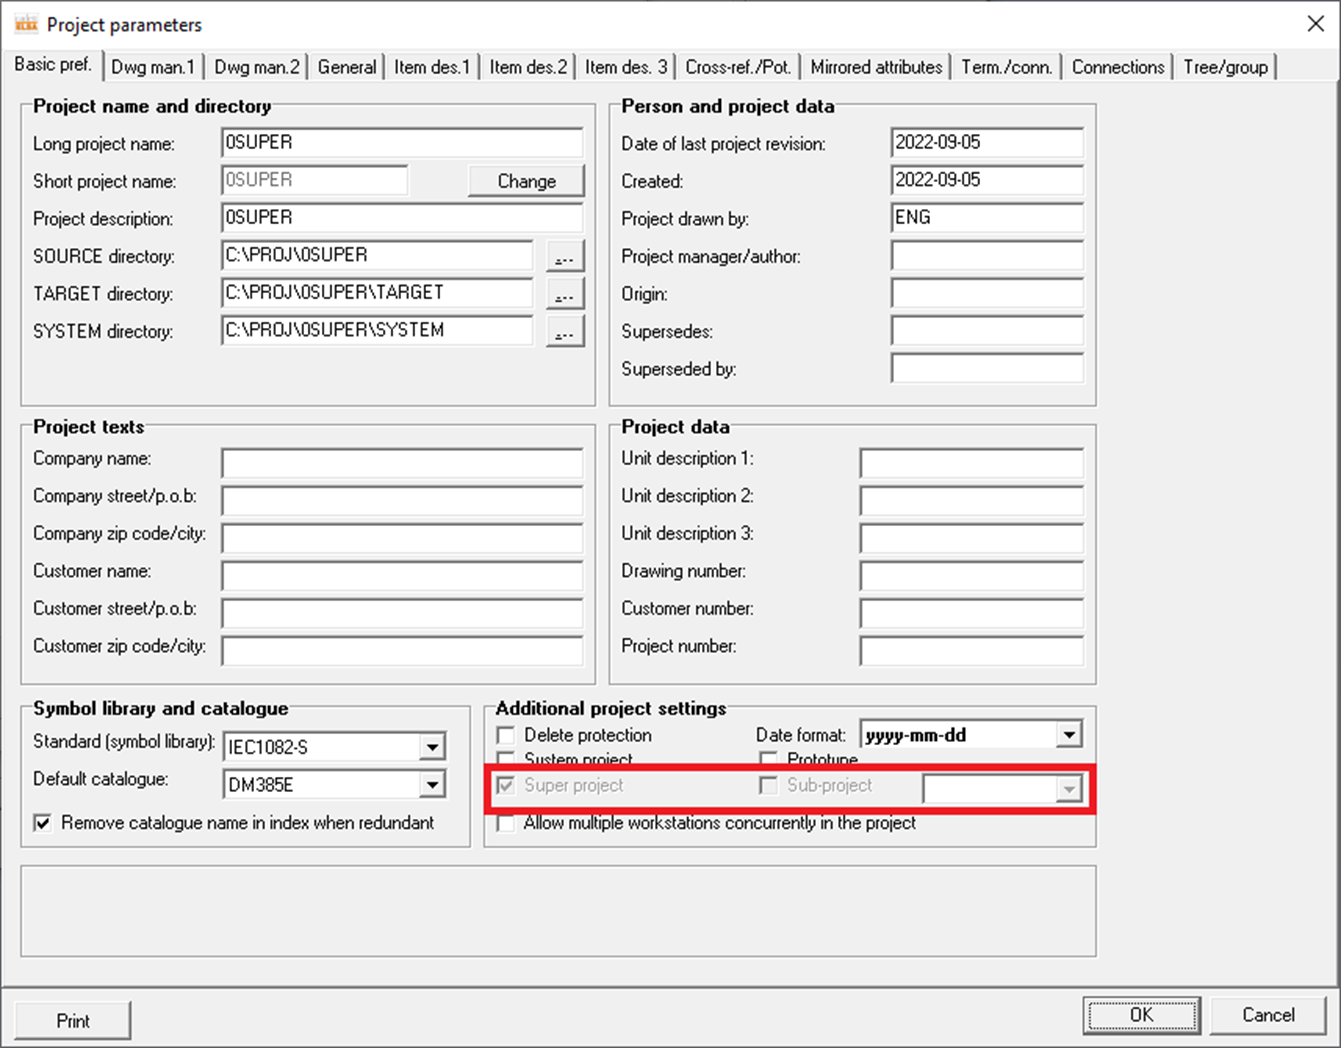 Figure 1485:  Parameters for management of super projects are found in the lower right part of the ”Basic preferences” tab of the ”Project parameters” dialogue box. 